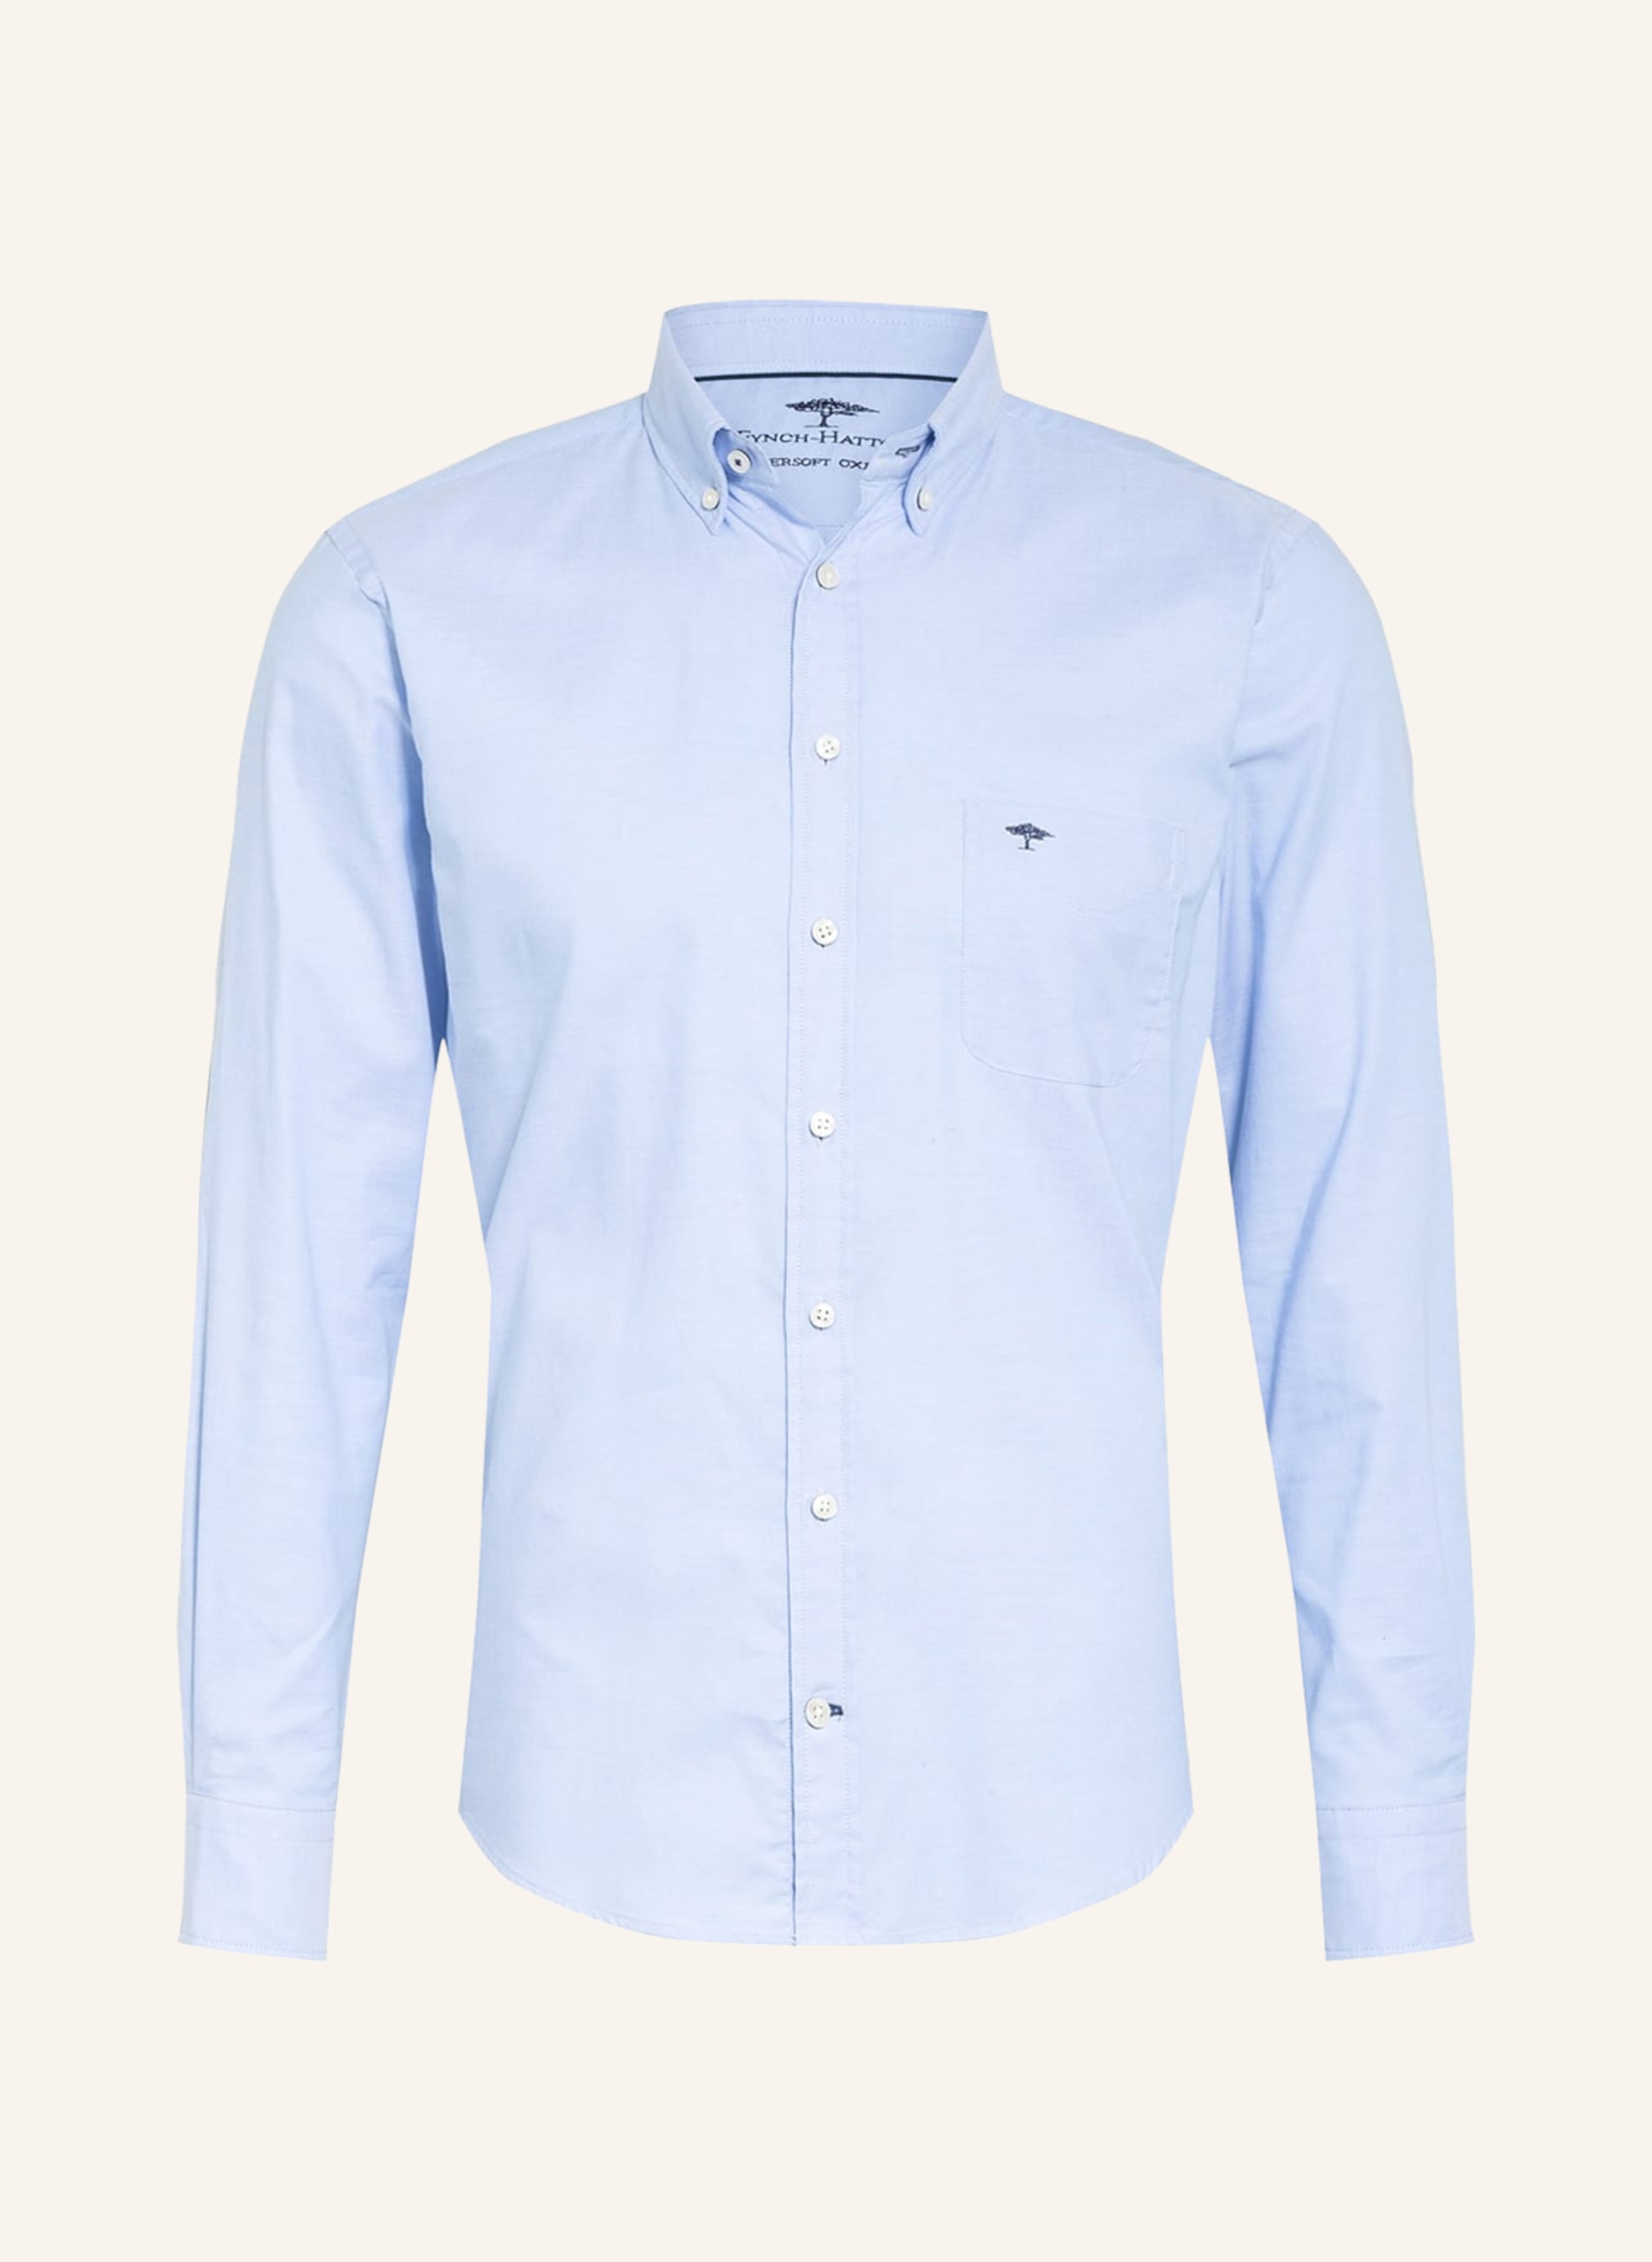 FYNCH-HATTON Shirt casual fit light blue in